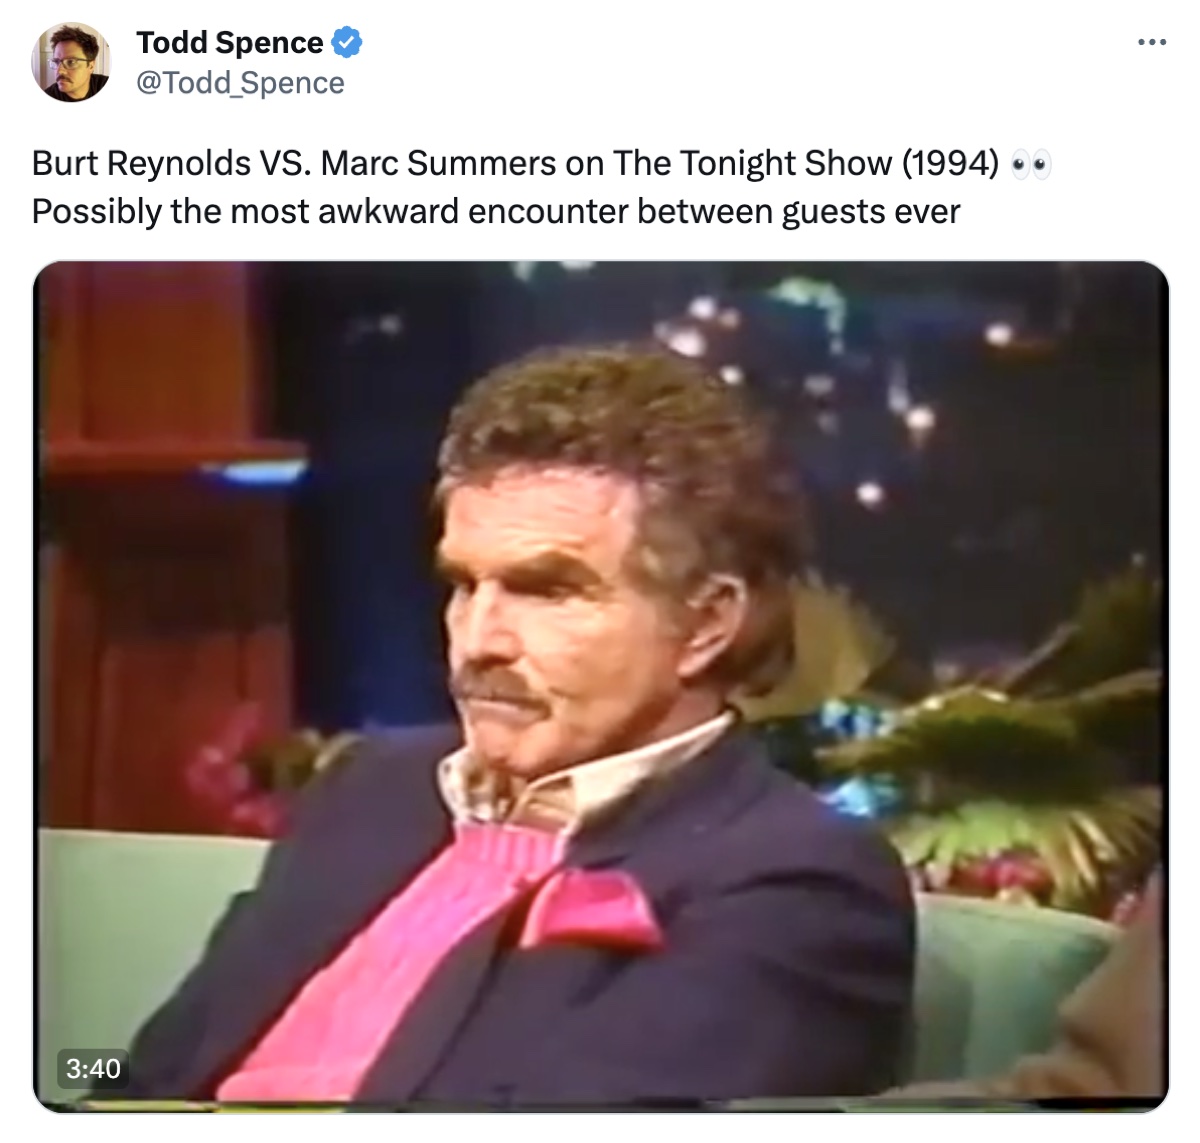 Todd Spence's tweet about Marc Summers and Burt Reynolds on The Tonight Show